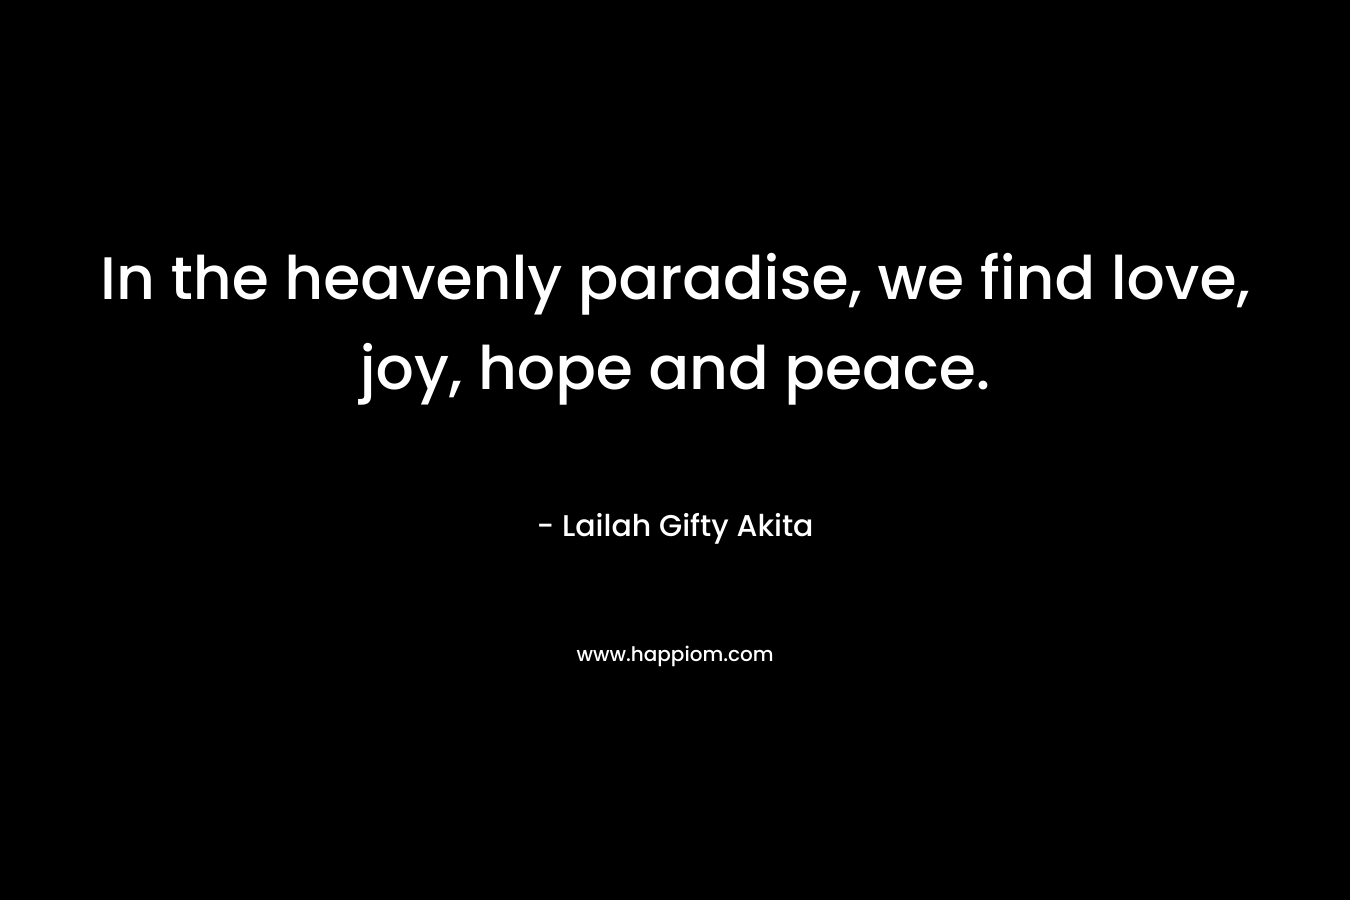 In the heavenly paradise, we find love, joy, hope and peace.